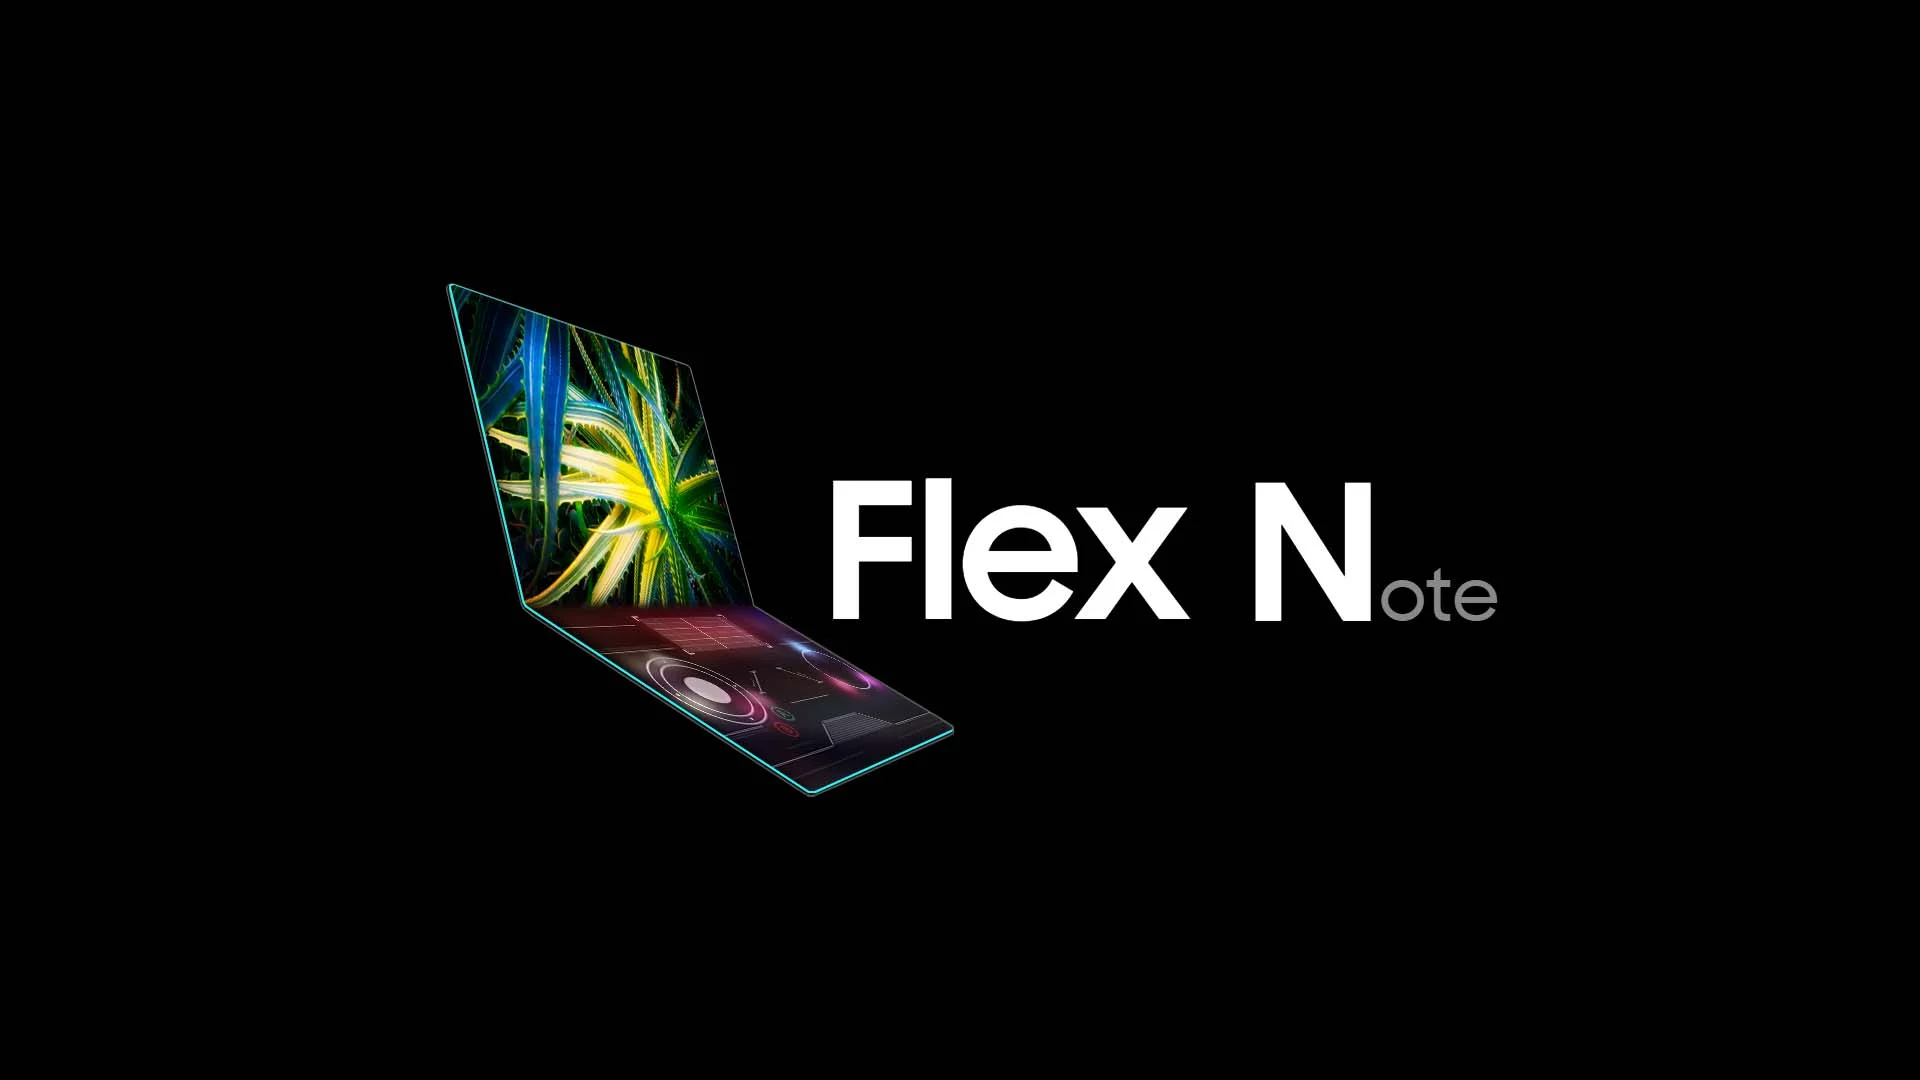 Samsung Flex Display Teases New Devices